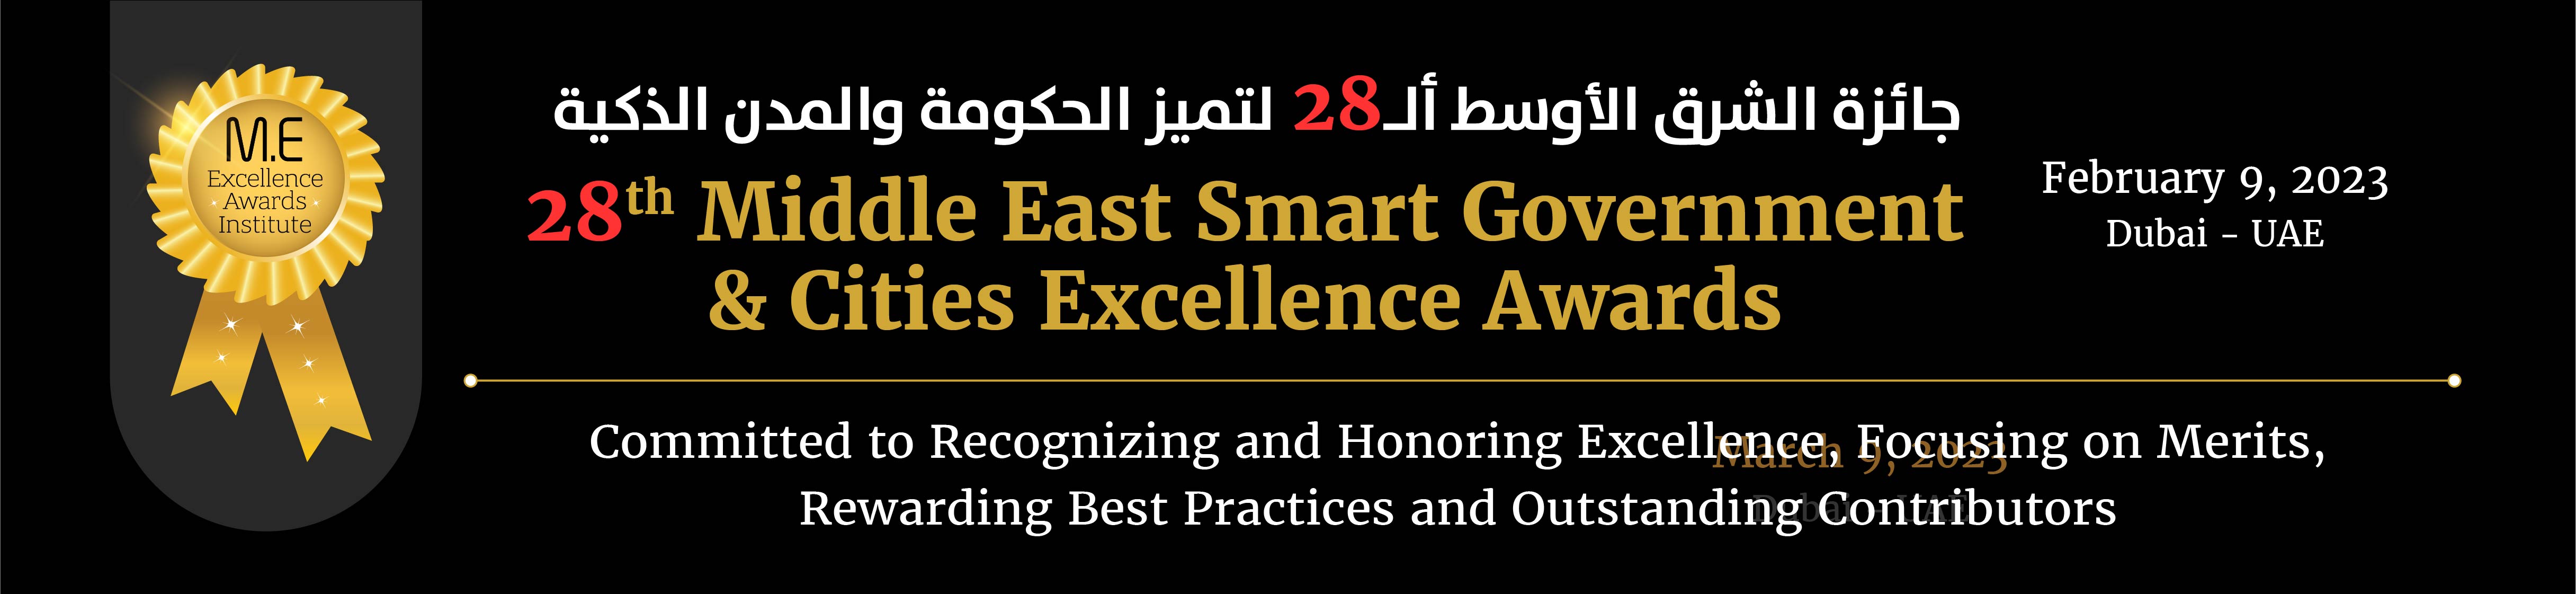 Middle East Excellence Awards Institute